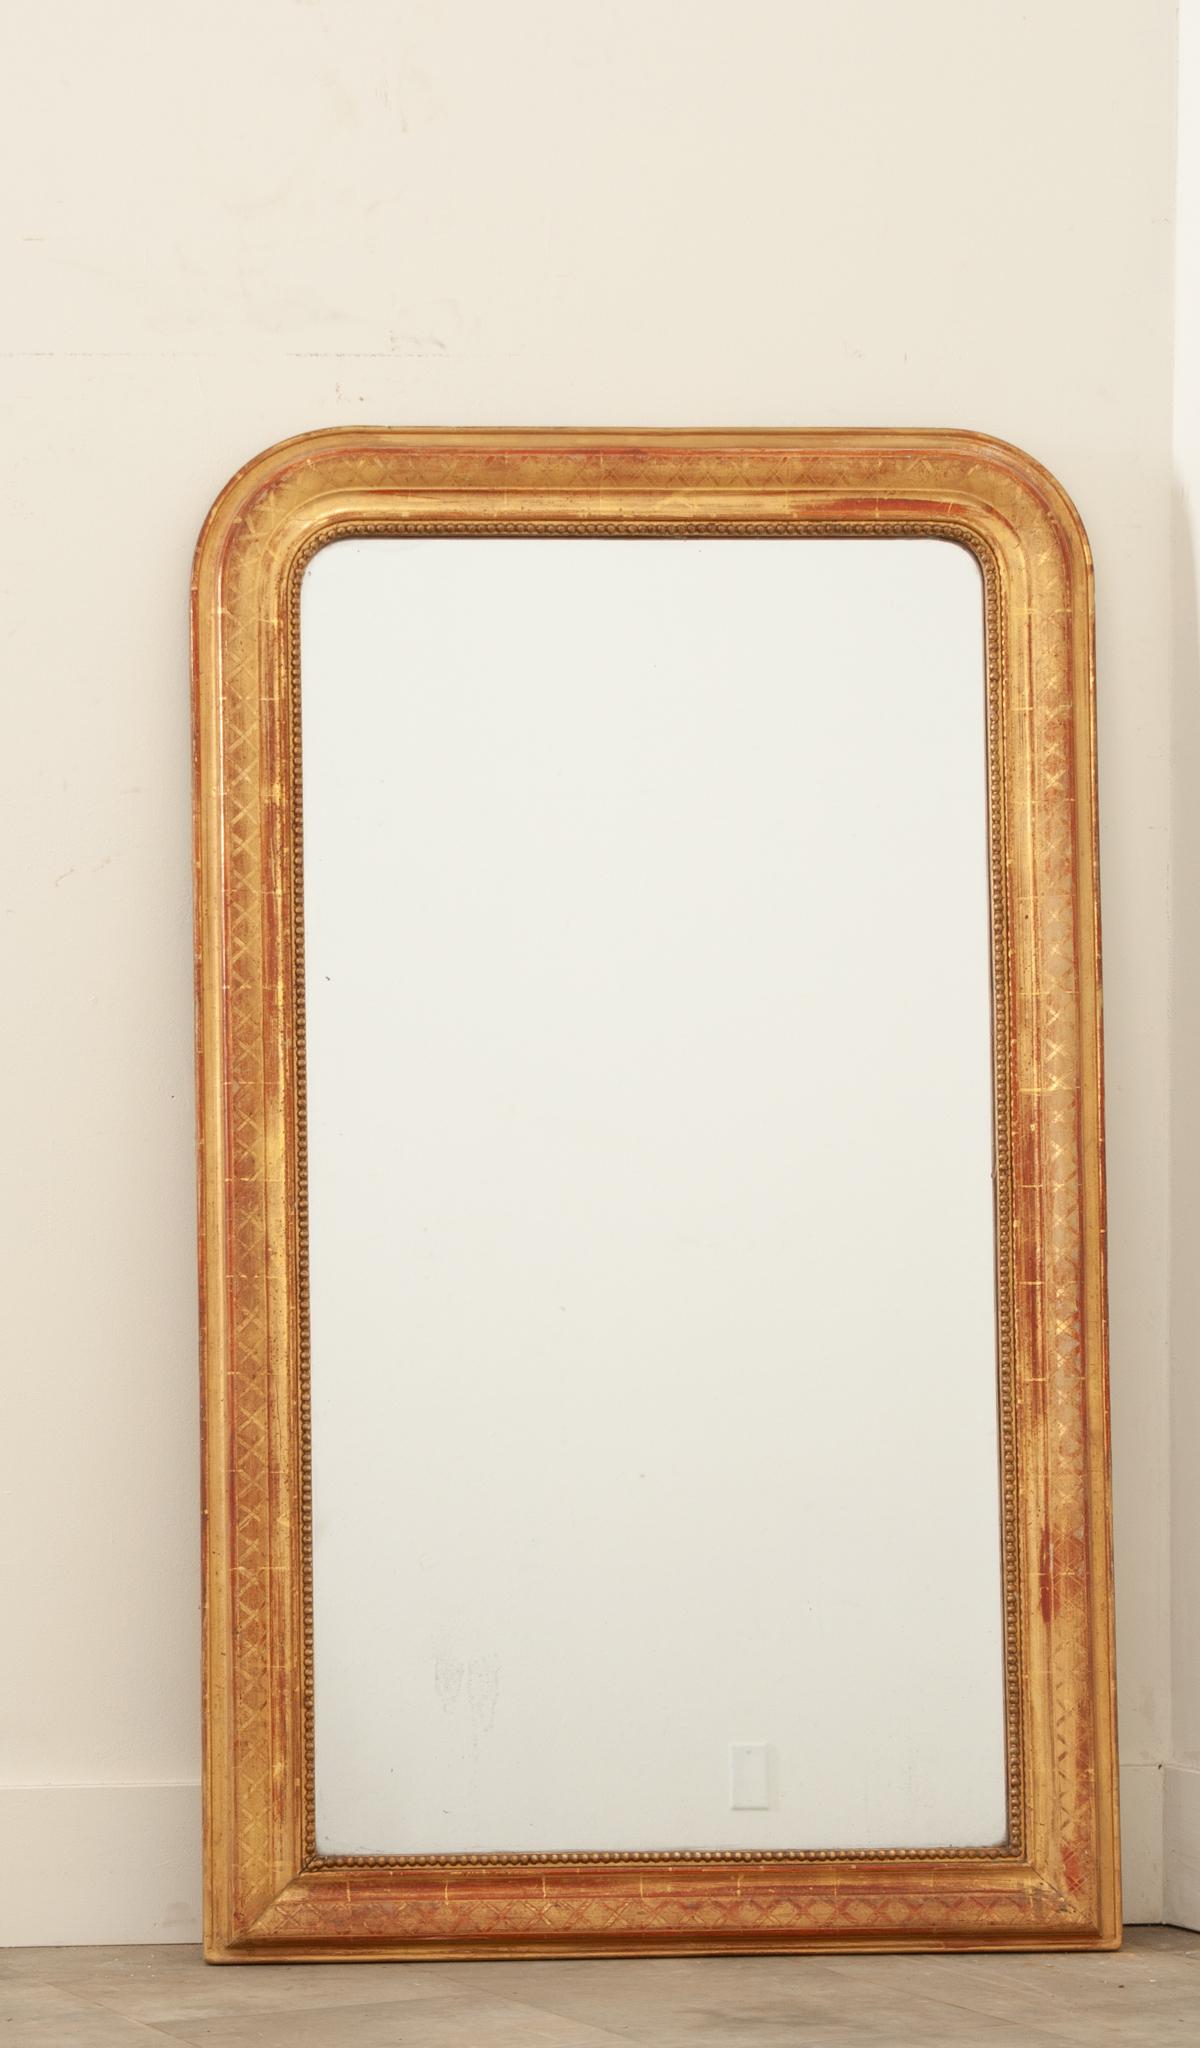 This French Louis Philippe style mirror hand-crafted in France in the 19th century is elegant and timeless with its molded and trimmed rectangular frame with rounded top corners. This lovely mirror features a beautifully etched cross hatch pattern